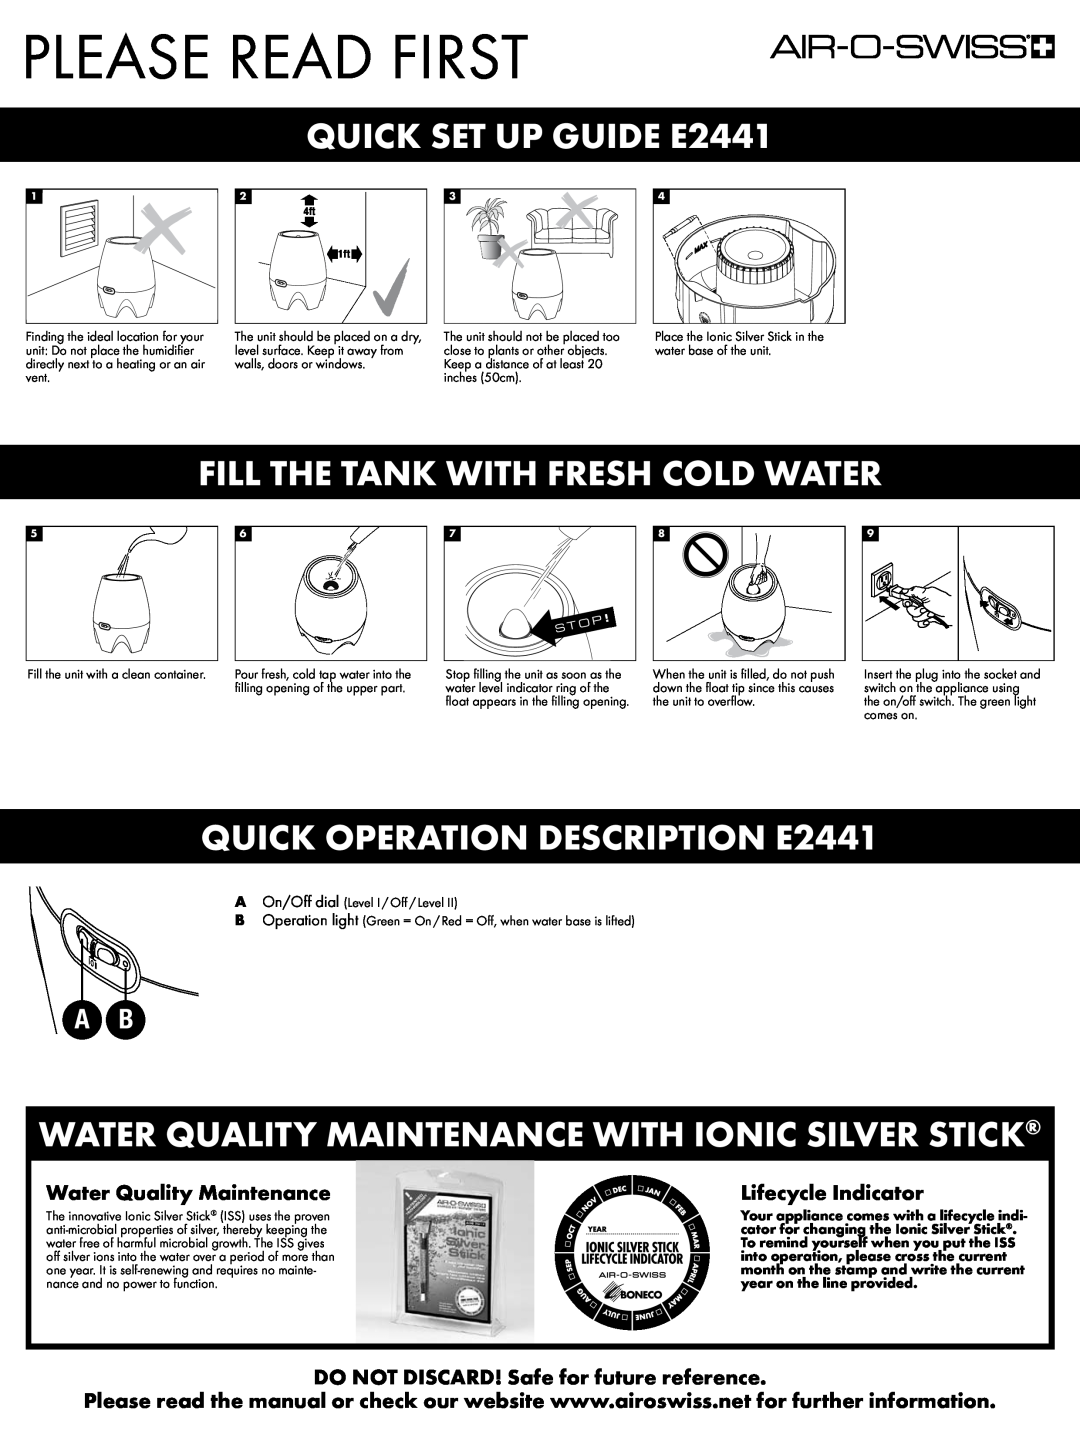 Air-O-Swiss setup guide Please Read First, QUICK SET UP GUIDE E2441, Fill The Tank With Fresh Cold Water 